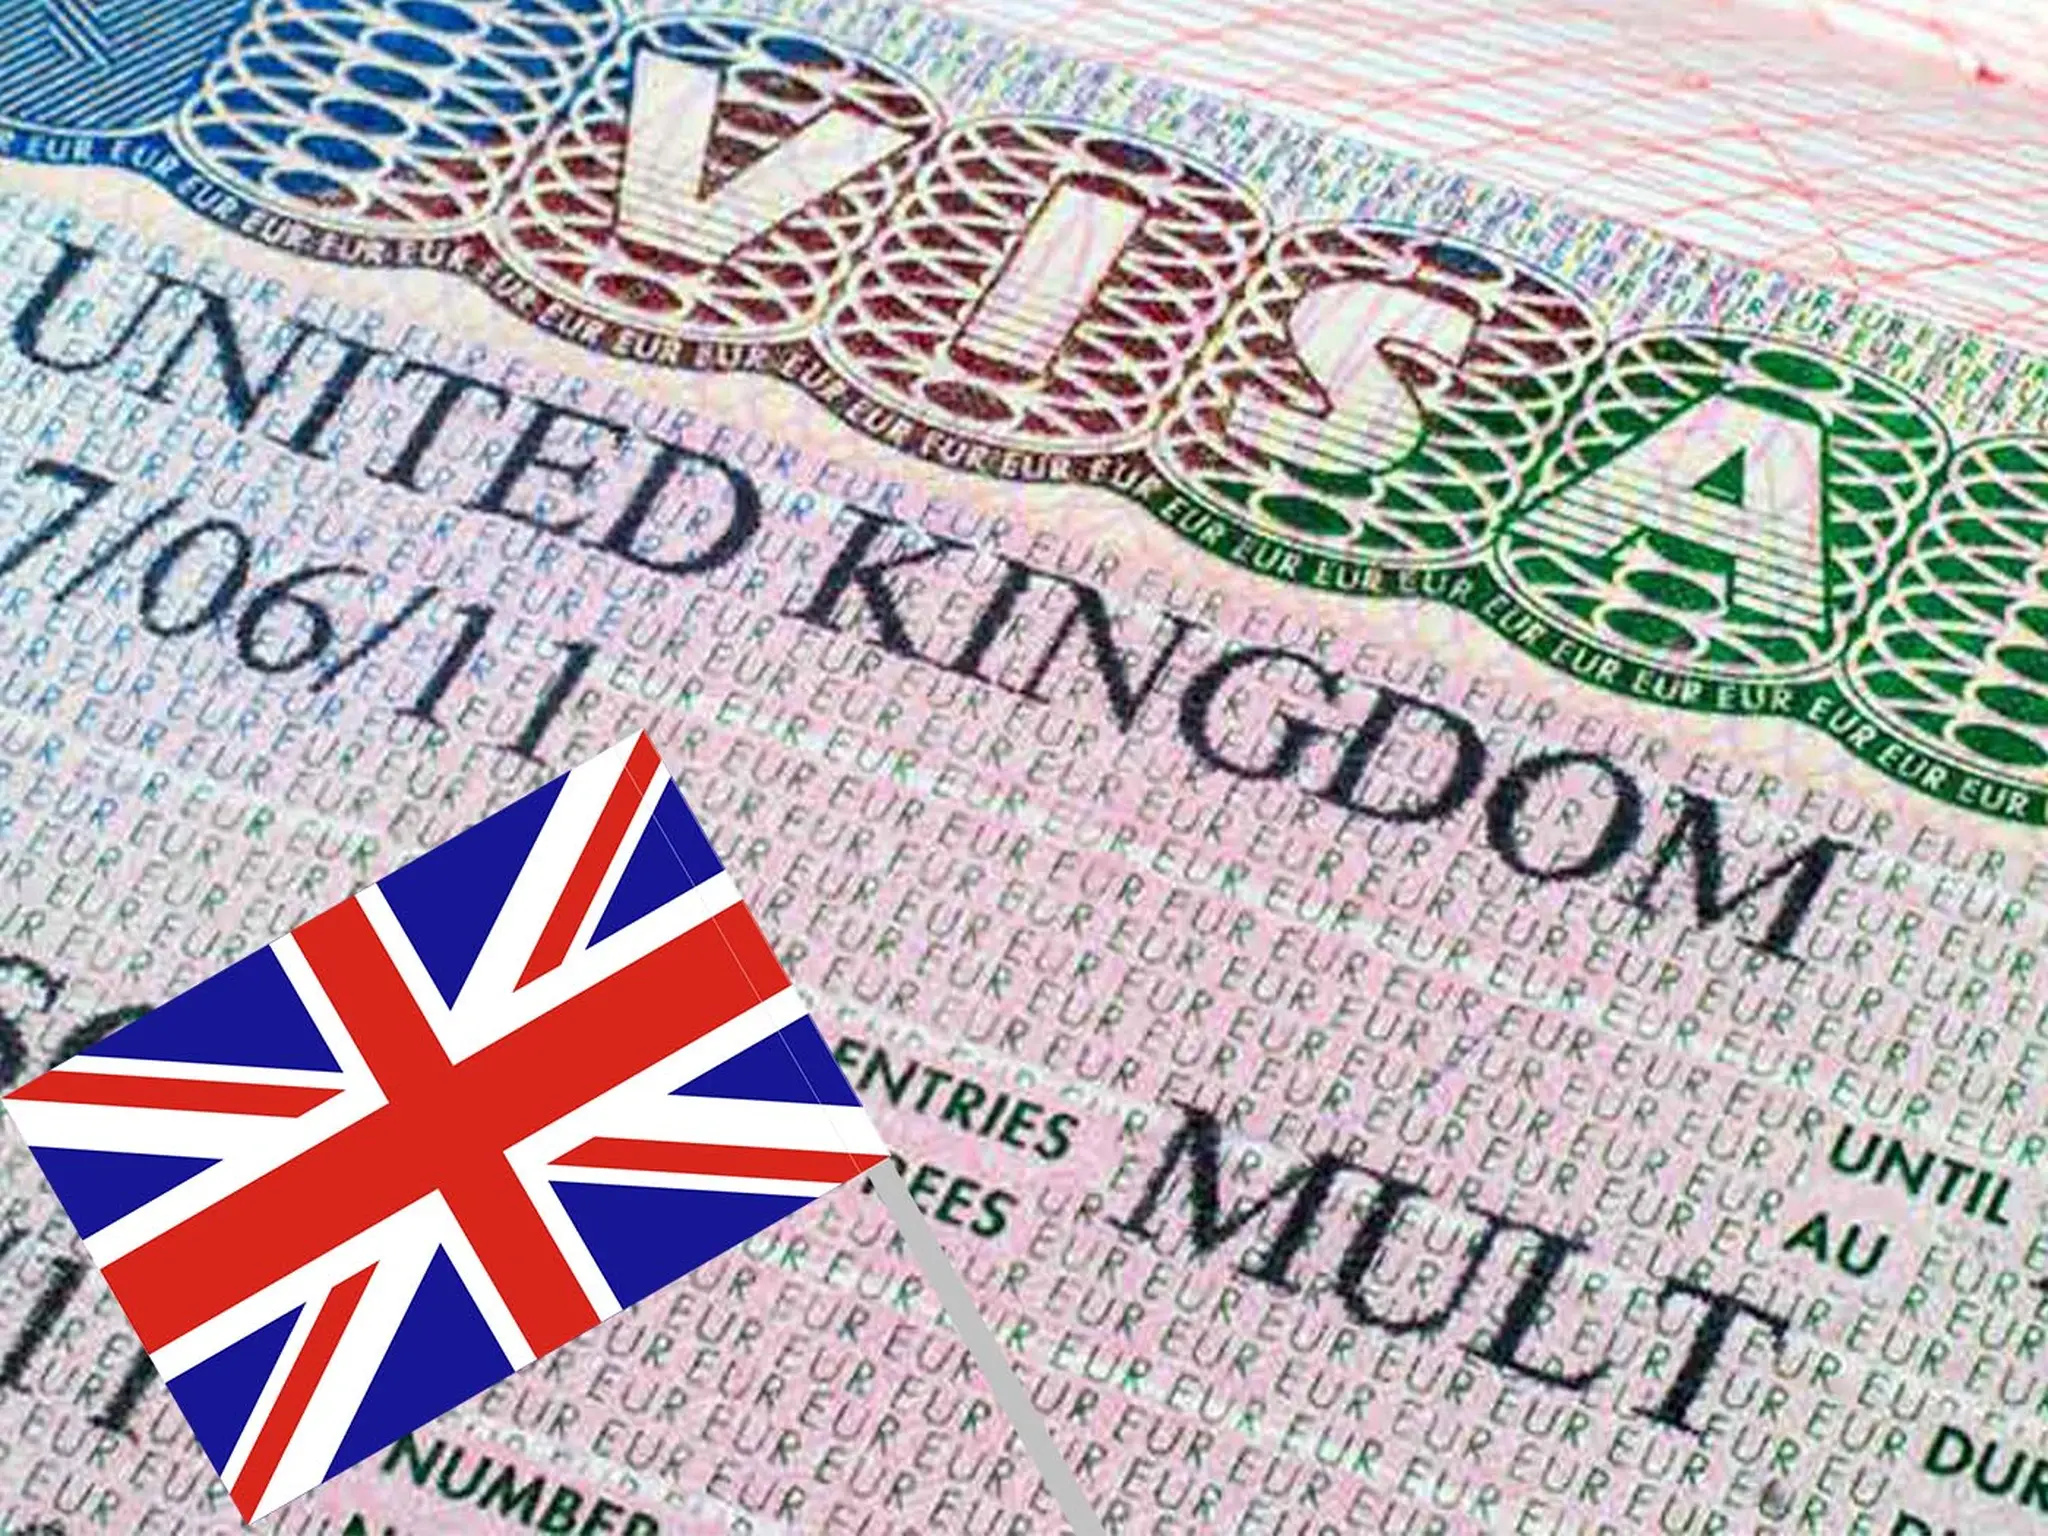 Britain authorises visa-free immigration for several Islamic nations